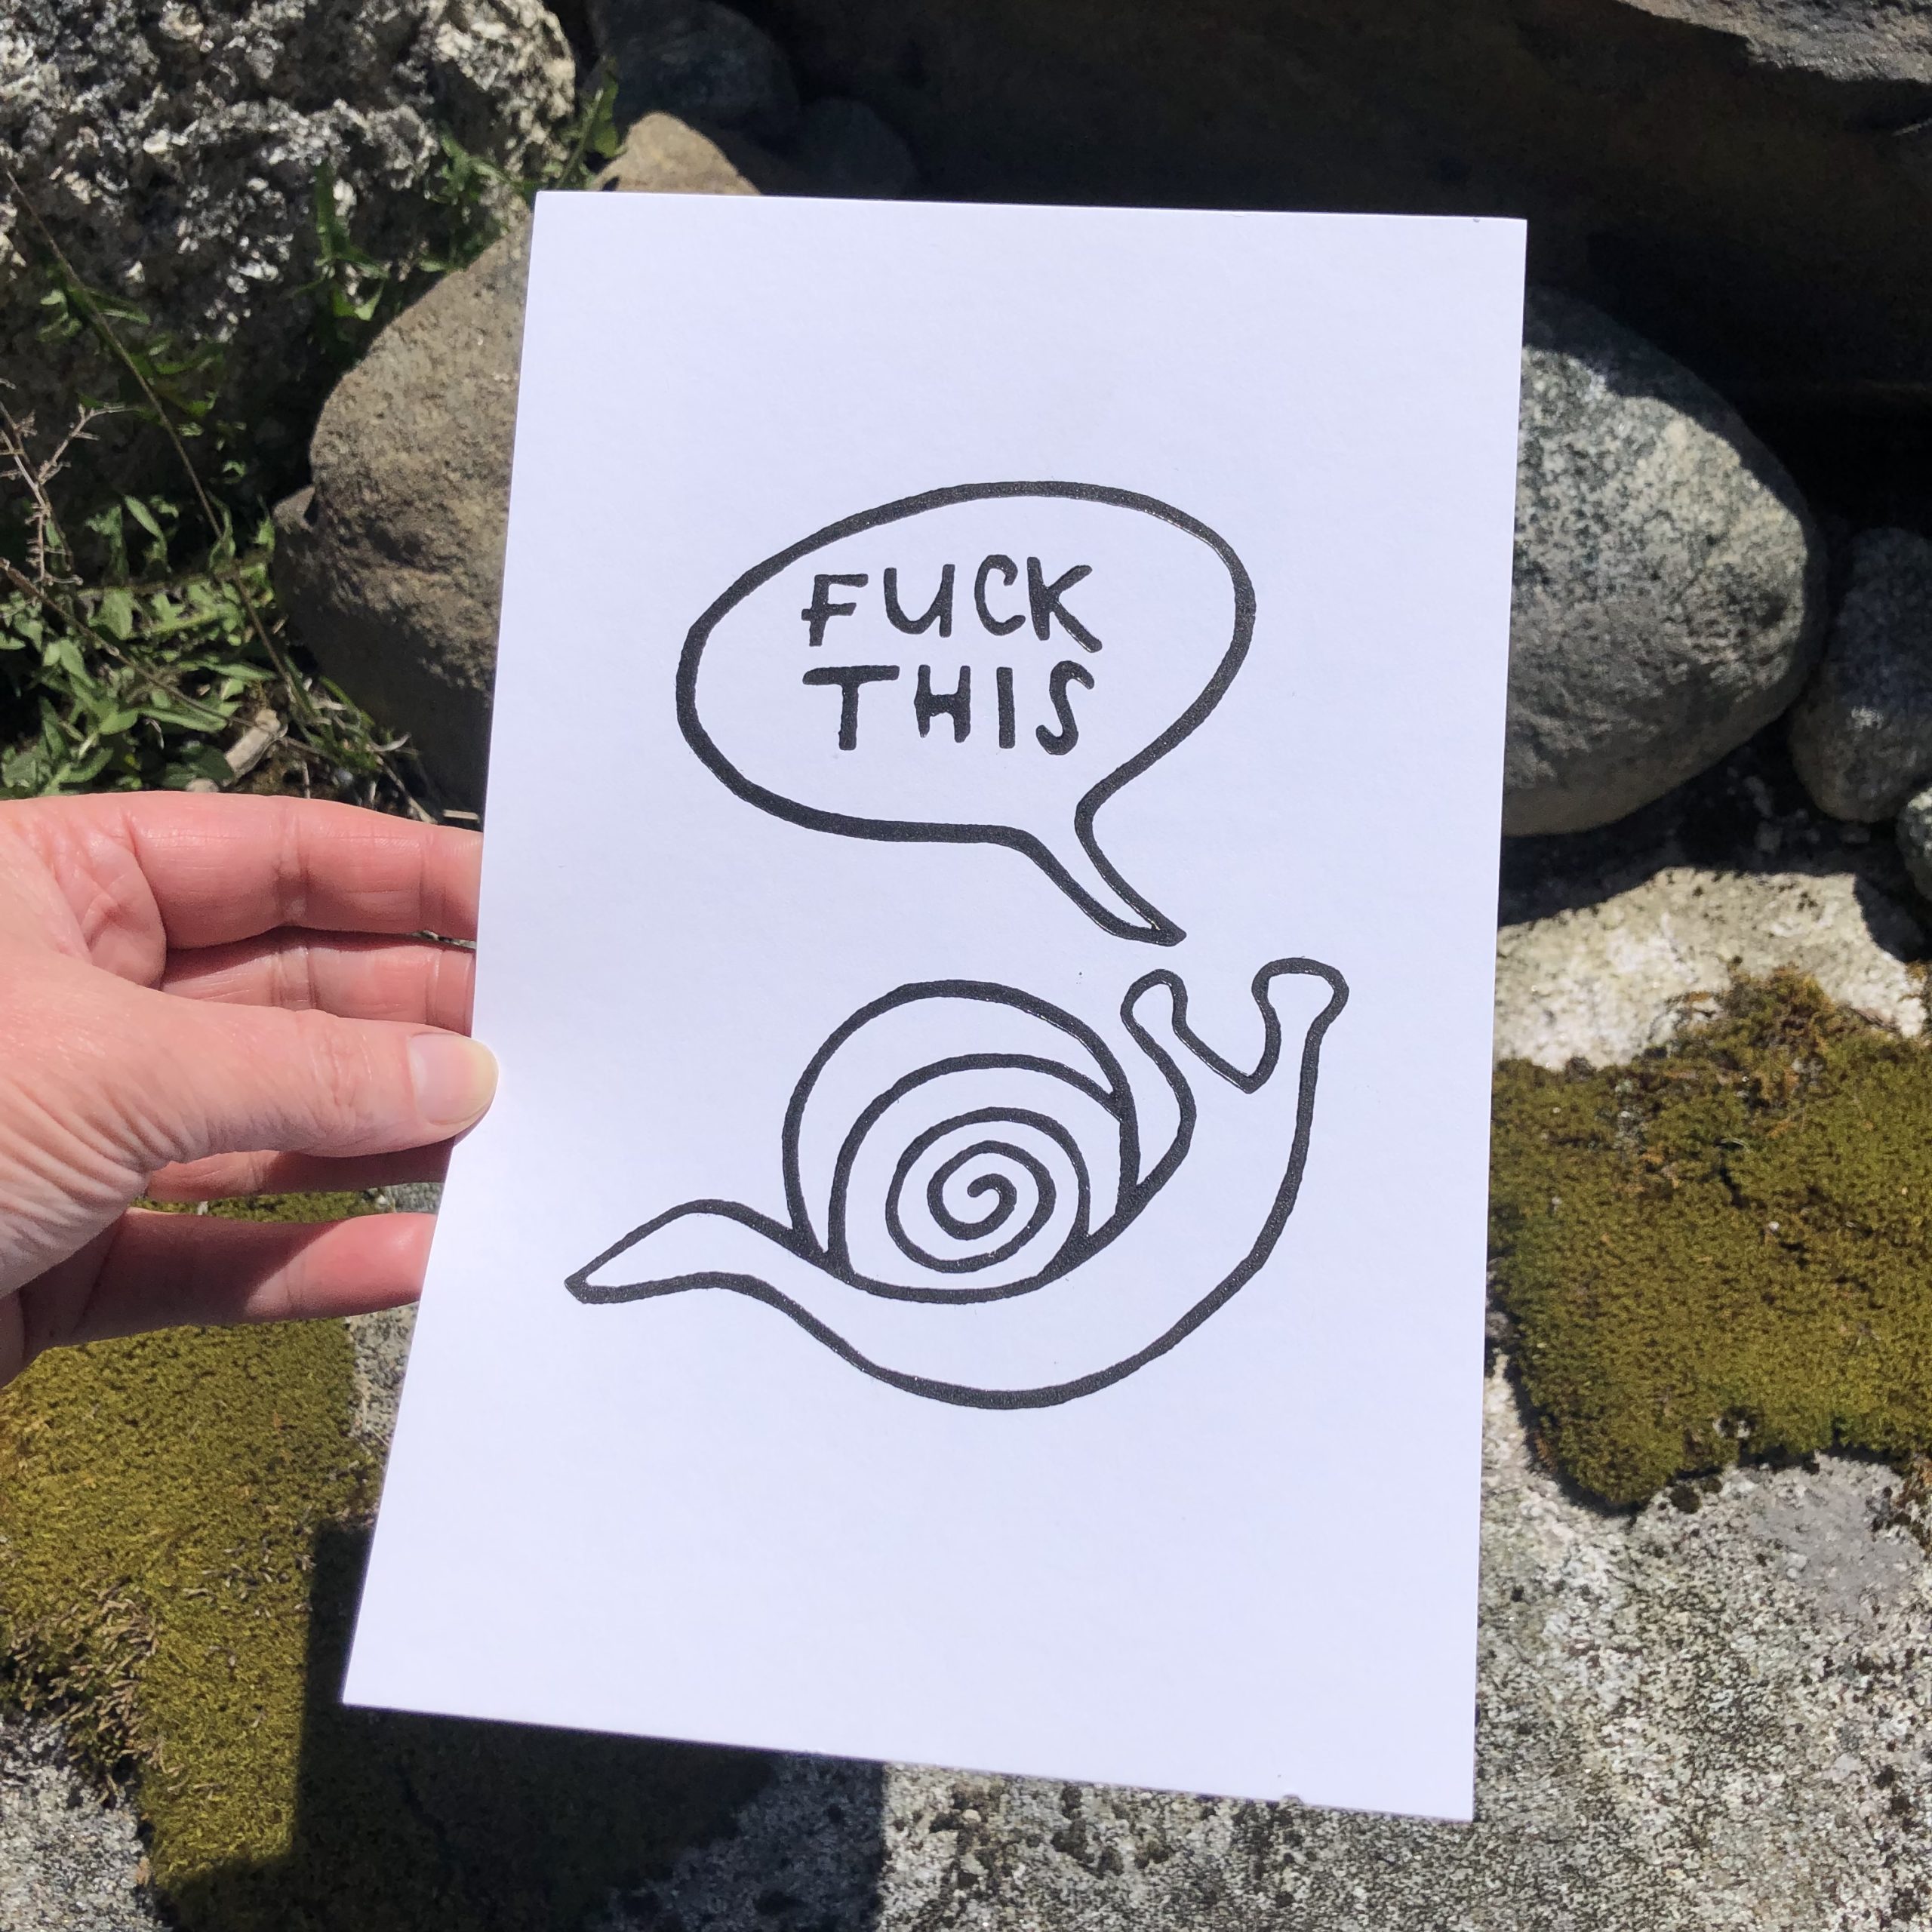 A white 6 x 9 linocut print held by a woman’s hand in front of some mossy boulders. The image printed in black ink is of the outline of snail with a speech bubble saying Fuck This in all caps.